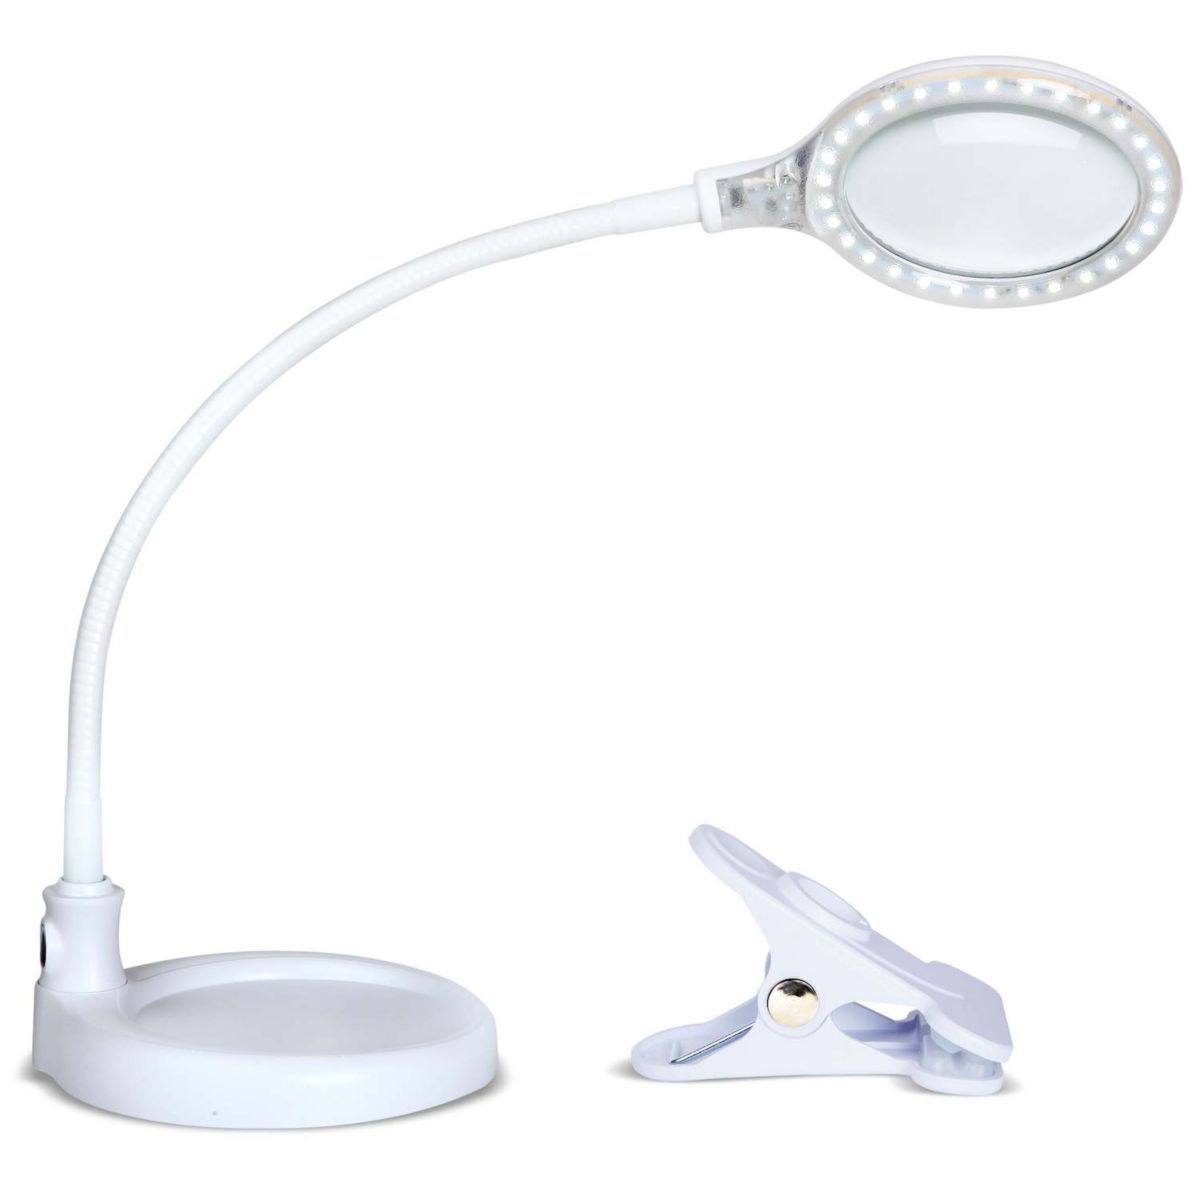 Brightech Lightview Flex 1.75x Magnifying, 3 Diopter Led Task Lamp W/ 2 Base Options, White Brightech